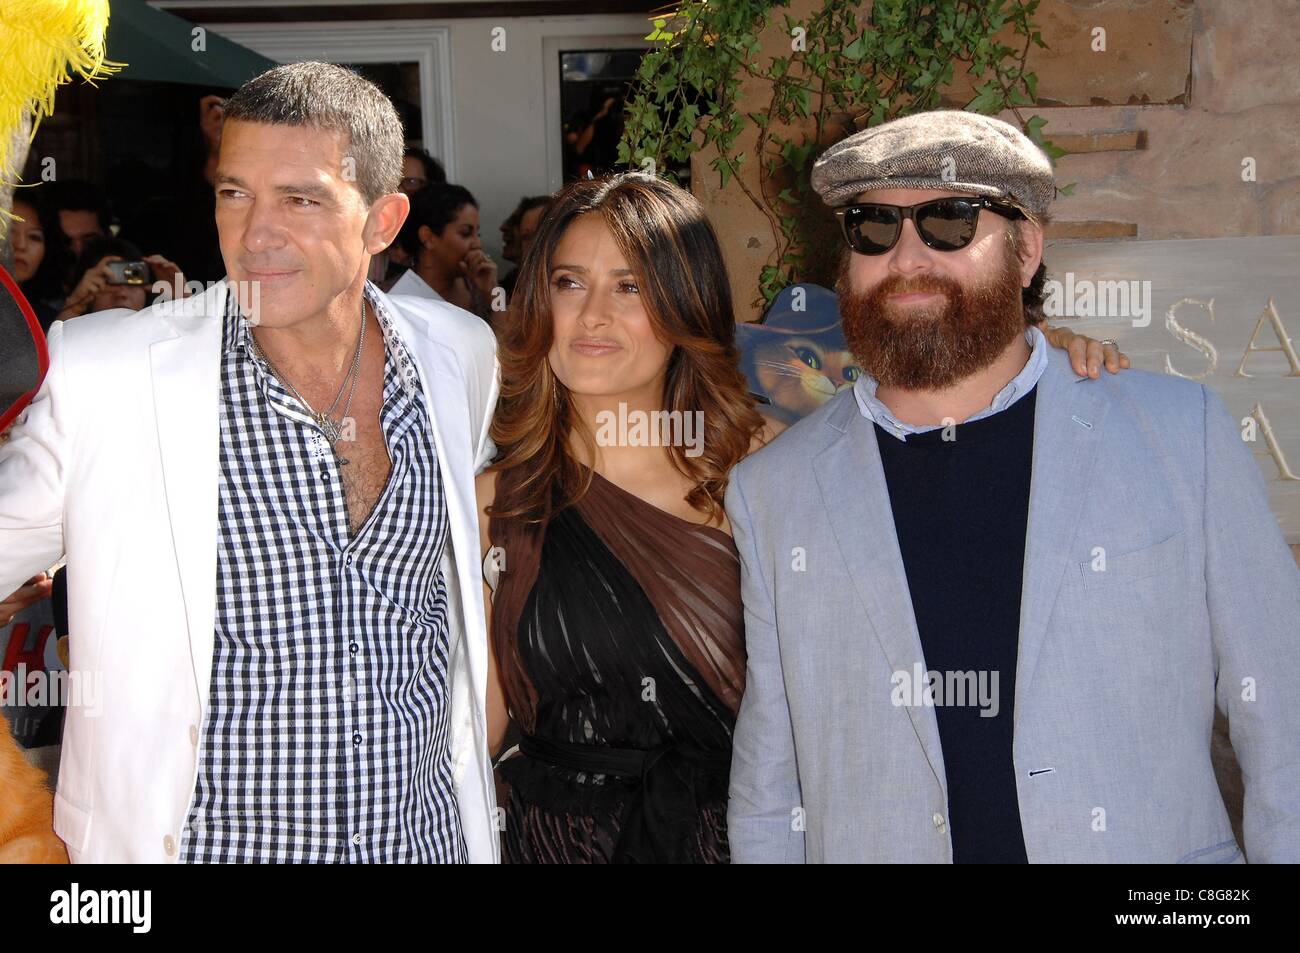 Antonio Banderas, Zach Galifianakis, Salma Hayek at arrivals for PUSS IN BOOTS Premiere, Regency Village Theater in Westwood, Los Angeles, CA October 23, 2011. Photo By: Michael Germana/Everett Collection Stock Photo